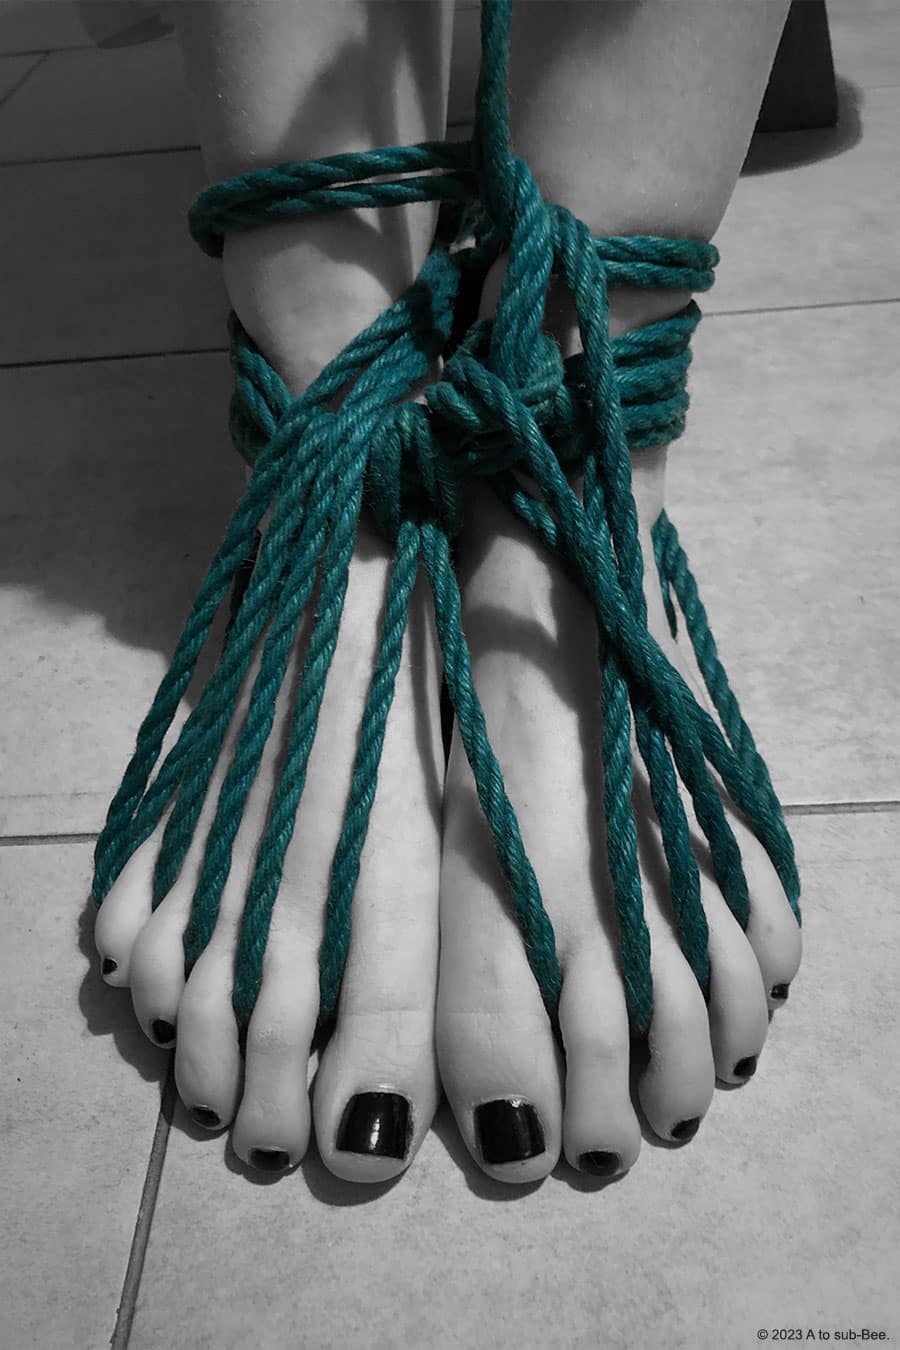 Euclidean Points feet tied up in rope as she experiences a foot tie for the first time